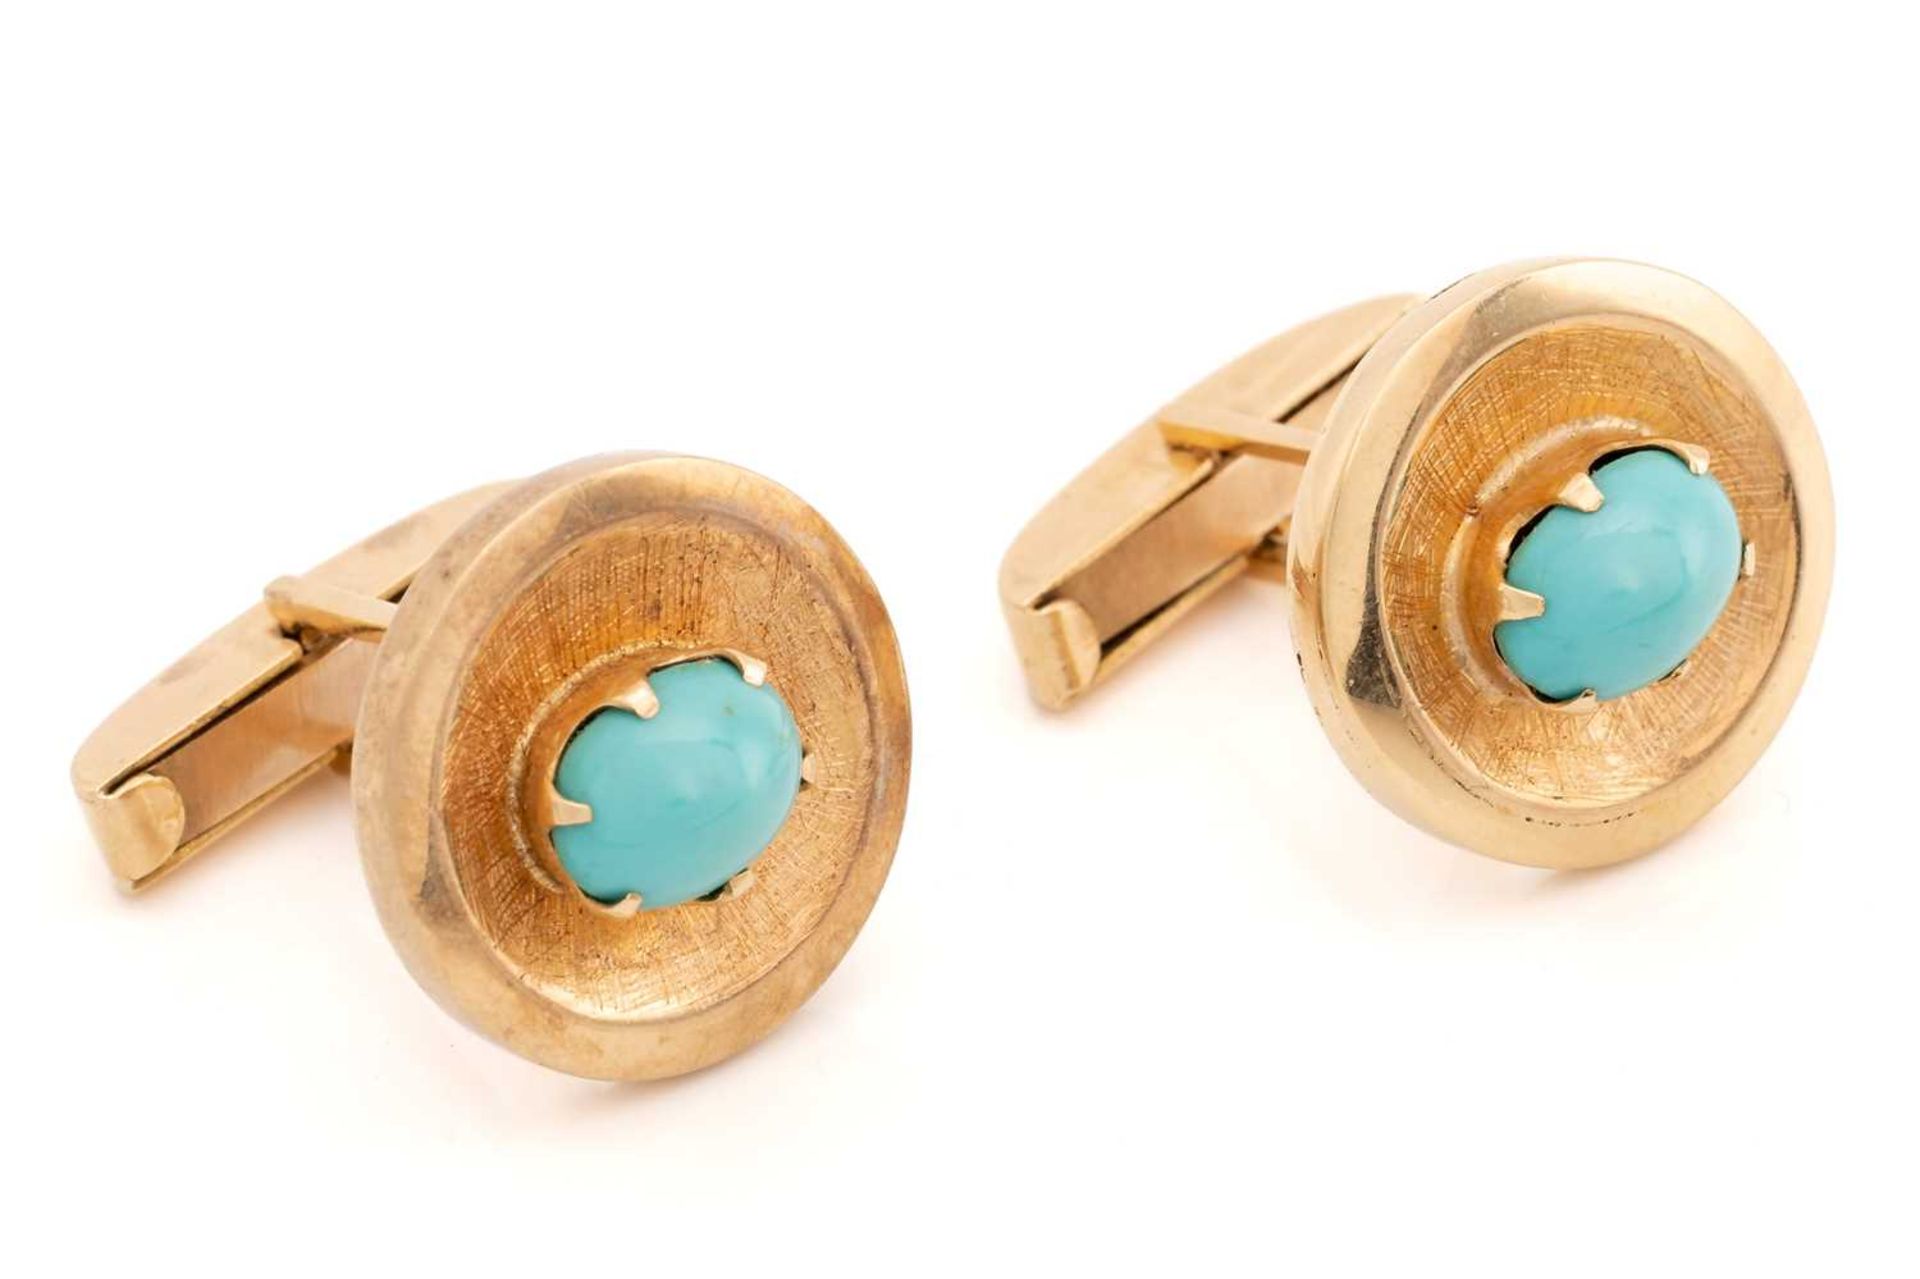 A pair of turquoise-set cufflinks, each featuring an oval Persian turquoise cabochon in claw